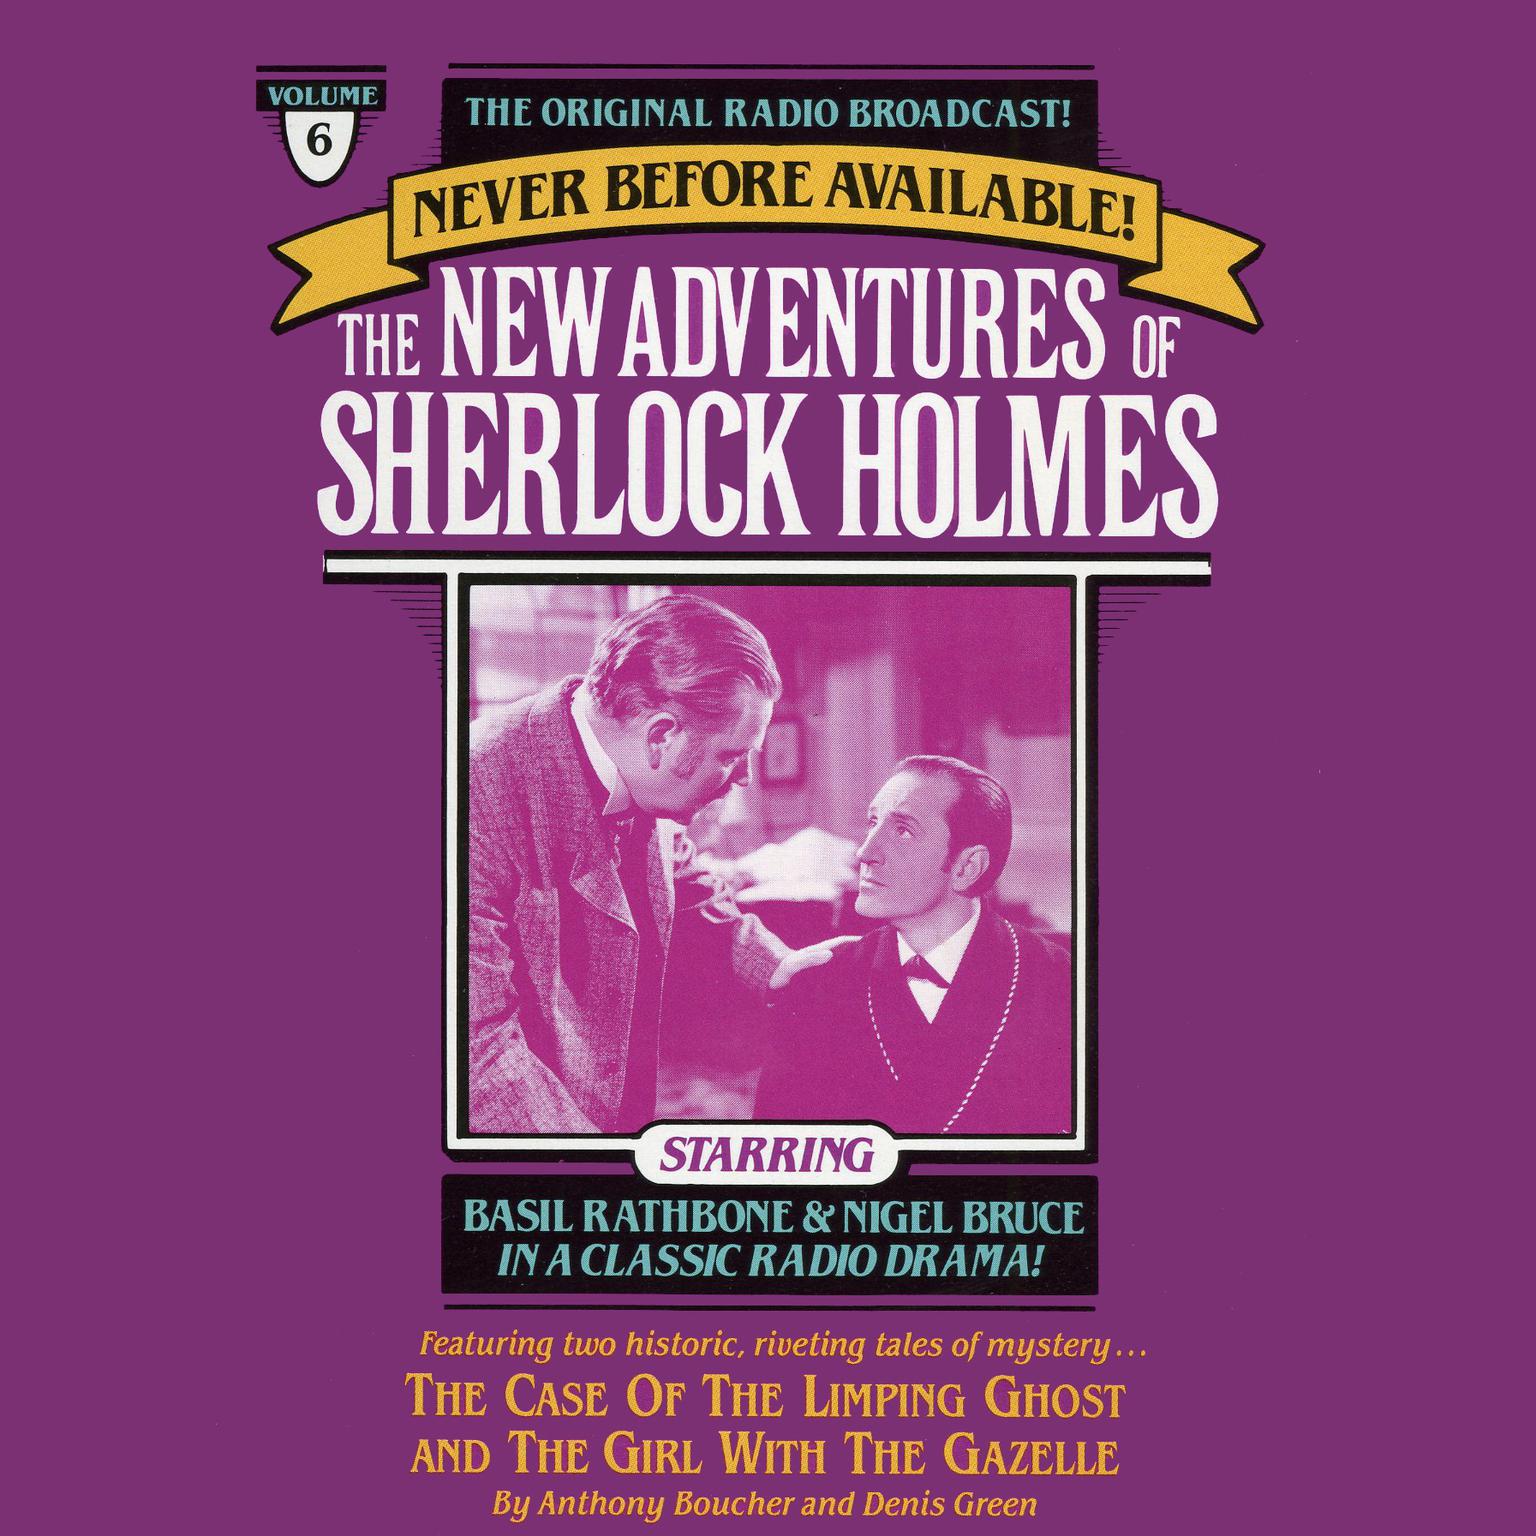 The Case of the Limping Ghost and The Girl with the Gazelle (Abridged): The New Adventures of Sherlock Holmes, Episode 6 Audiobook, by Anthony Boucher